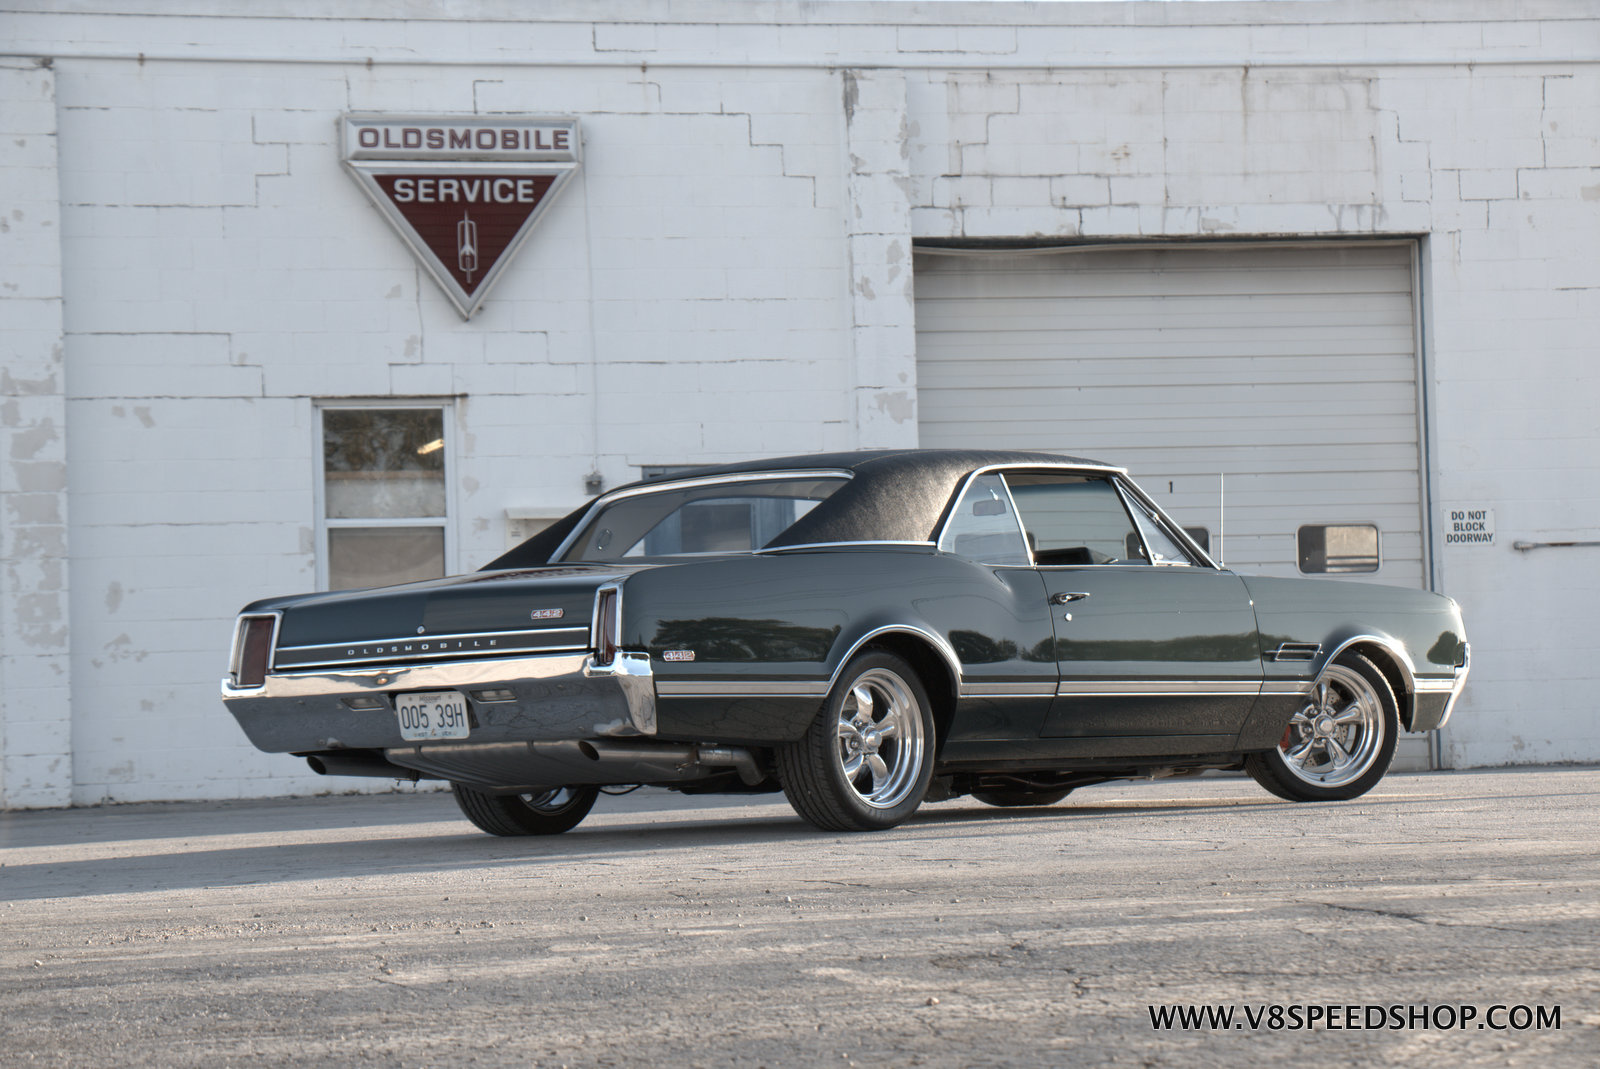 1966 Oldsmobile 442 LS3 Engine Swap Photo Gallery at V8 Speed and Resto Shop